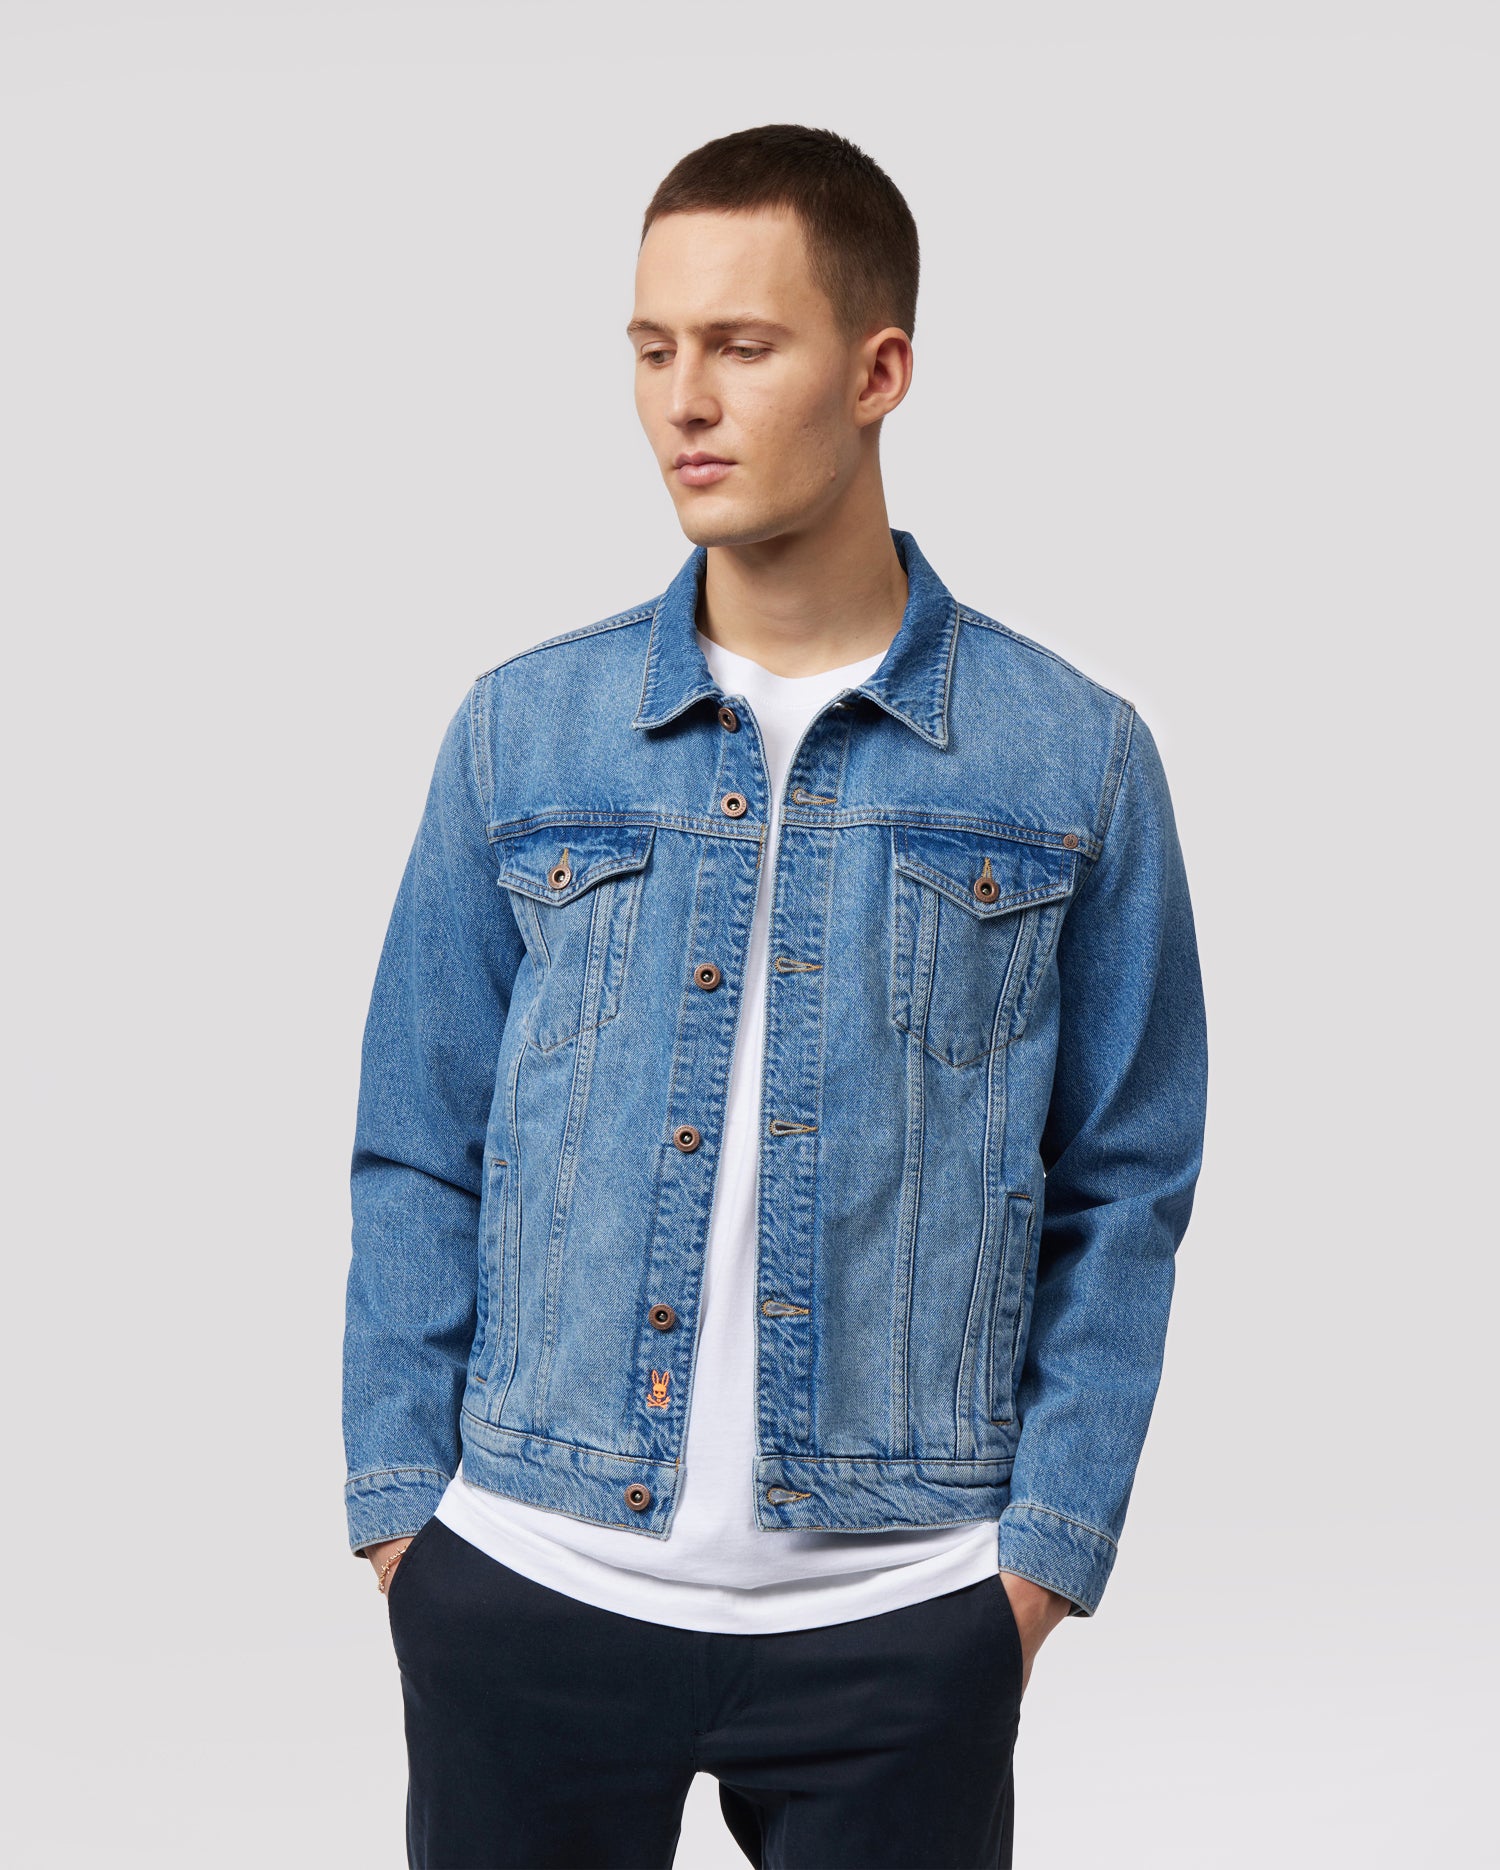 Urban Classics Mens Light Jacket TB1438 Ripped Denim Jacket Color: Bleached  in Size: Small at Amazon Men's Clothing store